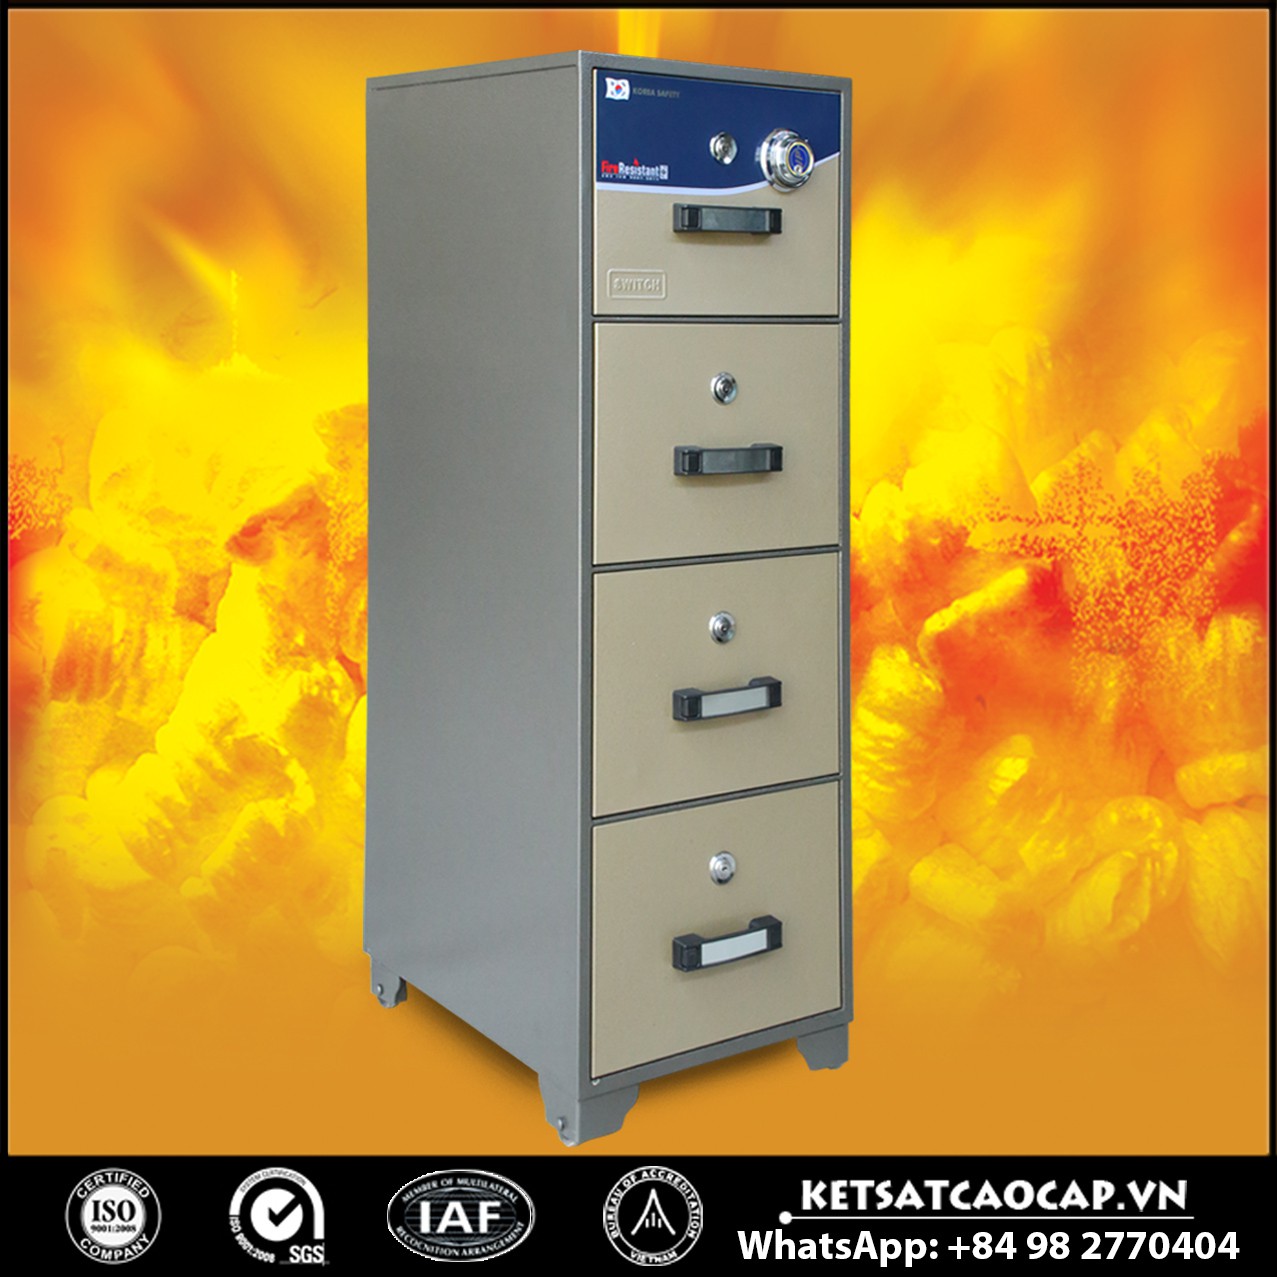 Fireproof Cabinets products for sale